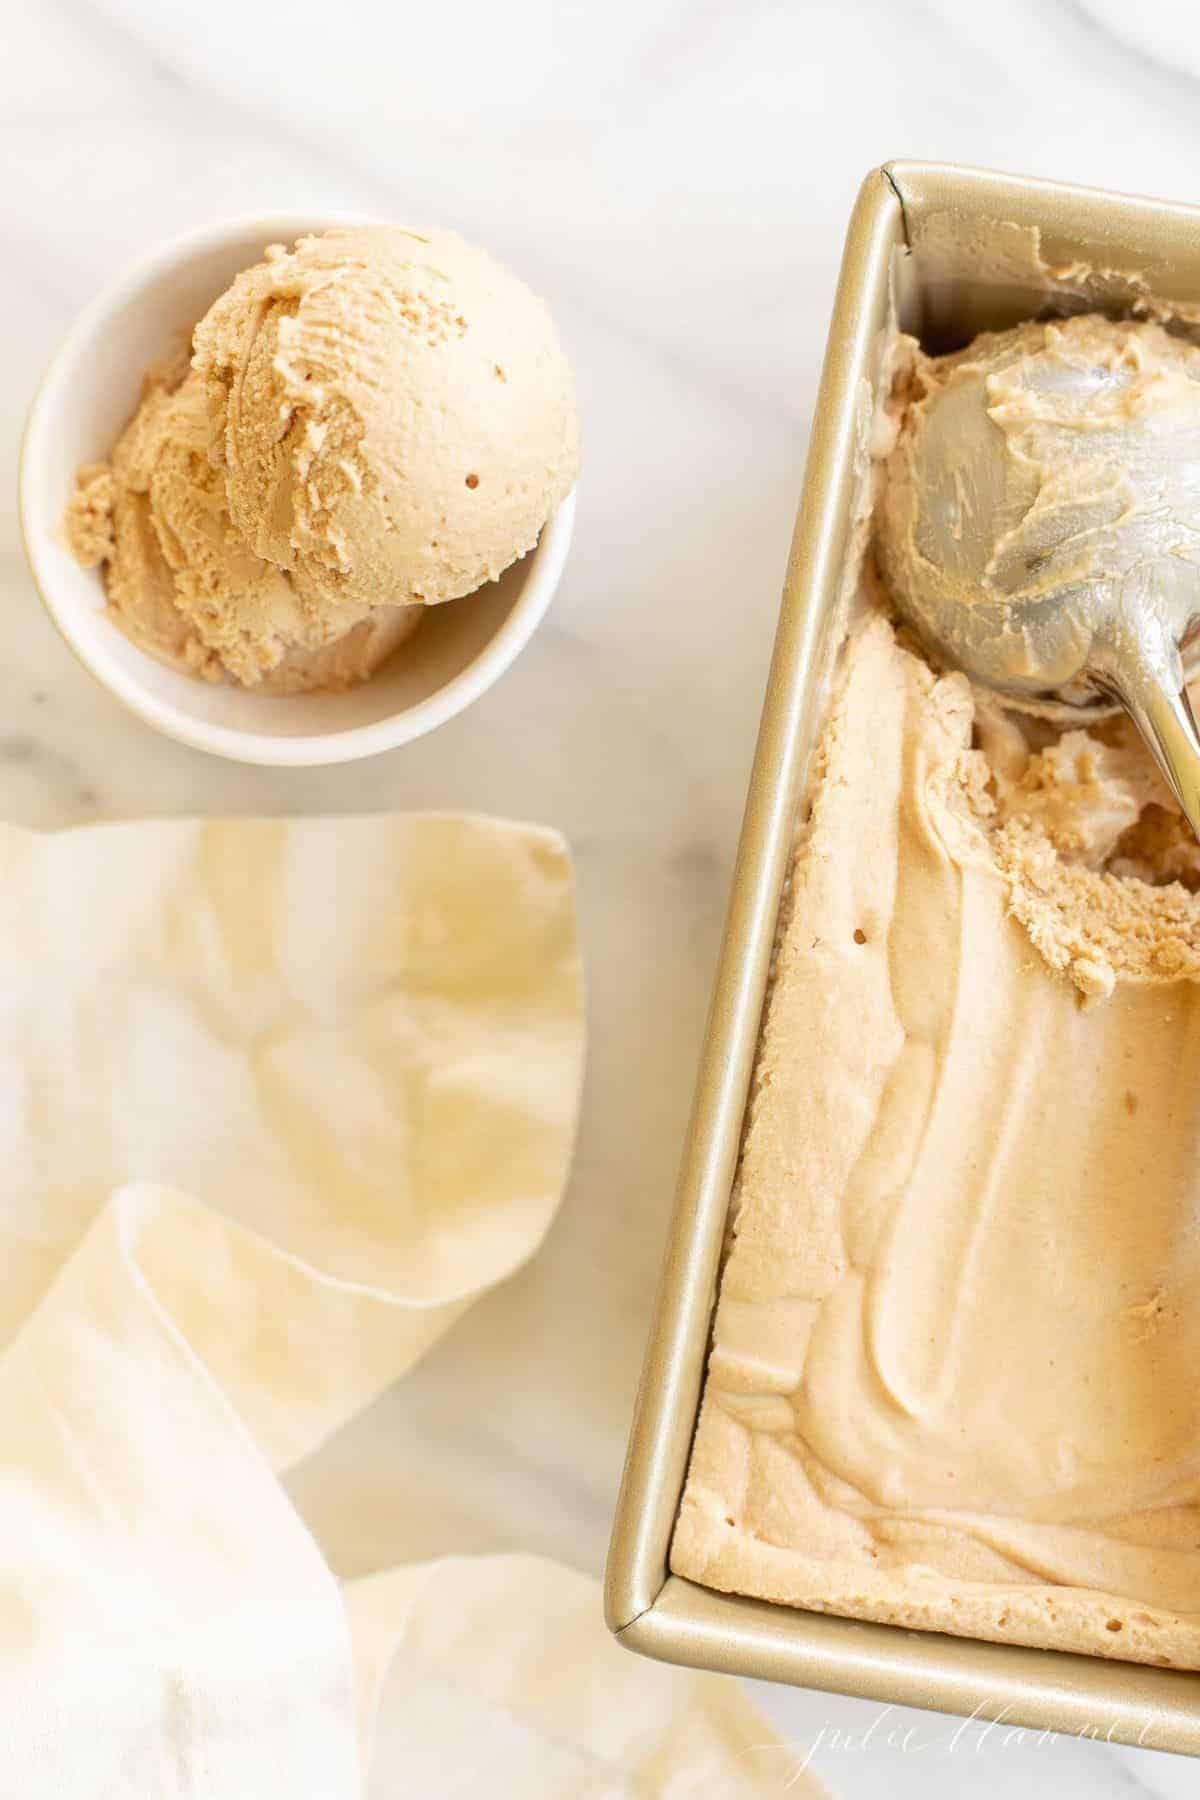 Gold pan filled with ice cream, scoop of ice cream in a bowl to the side. #cookiebuttericecream #speculoosicecream